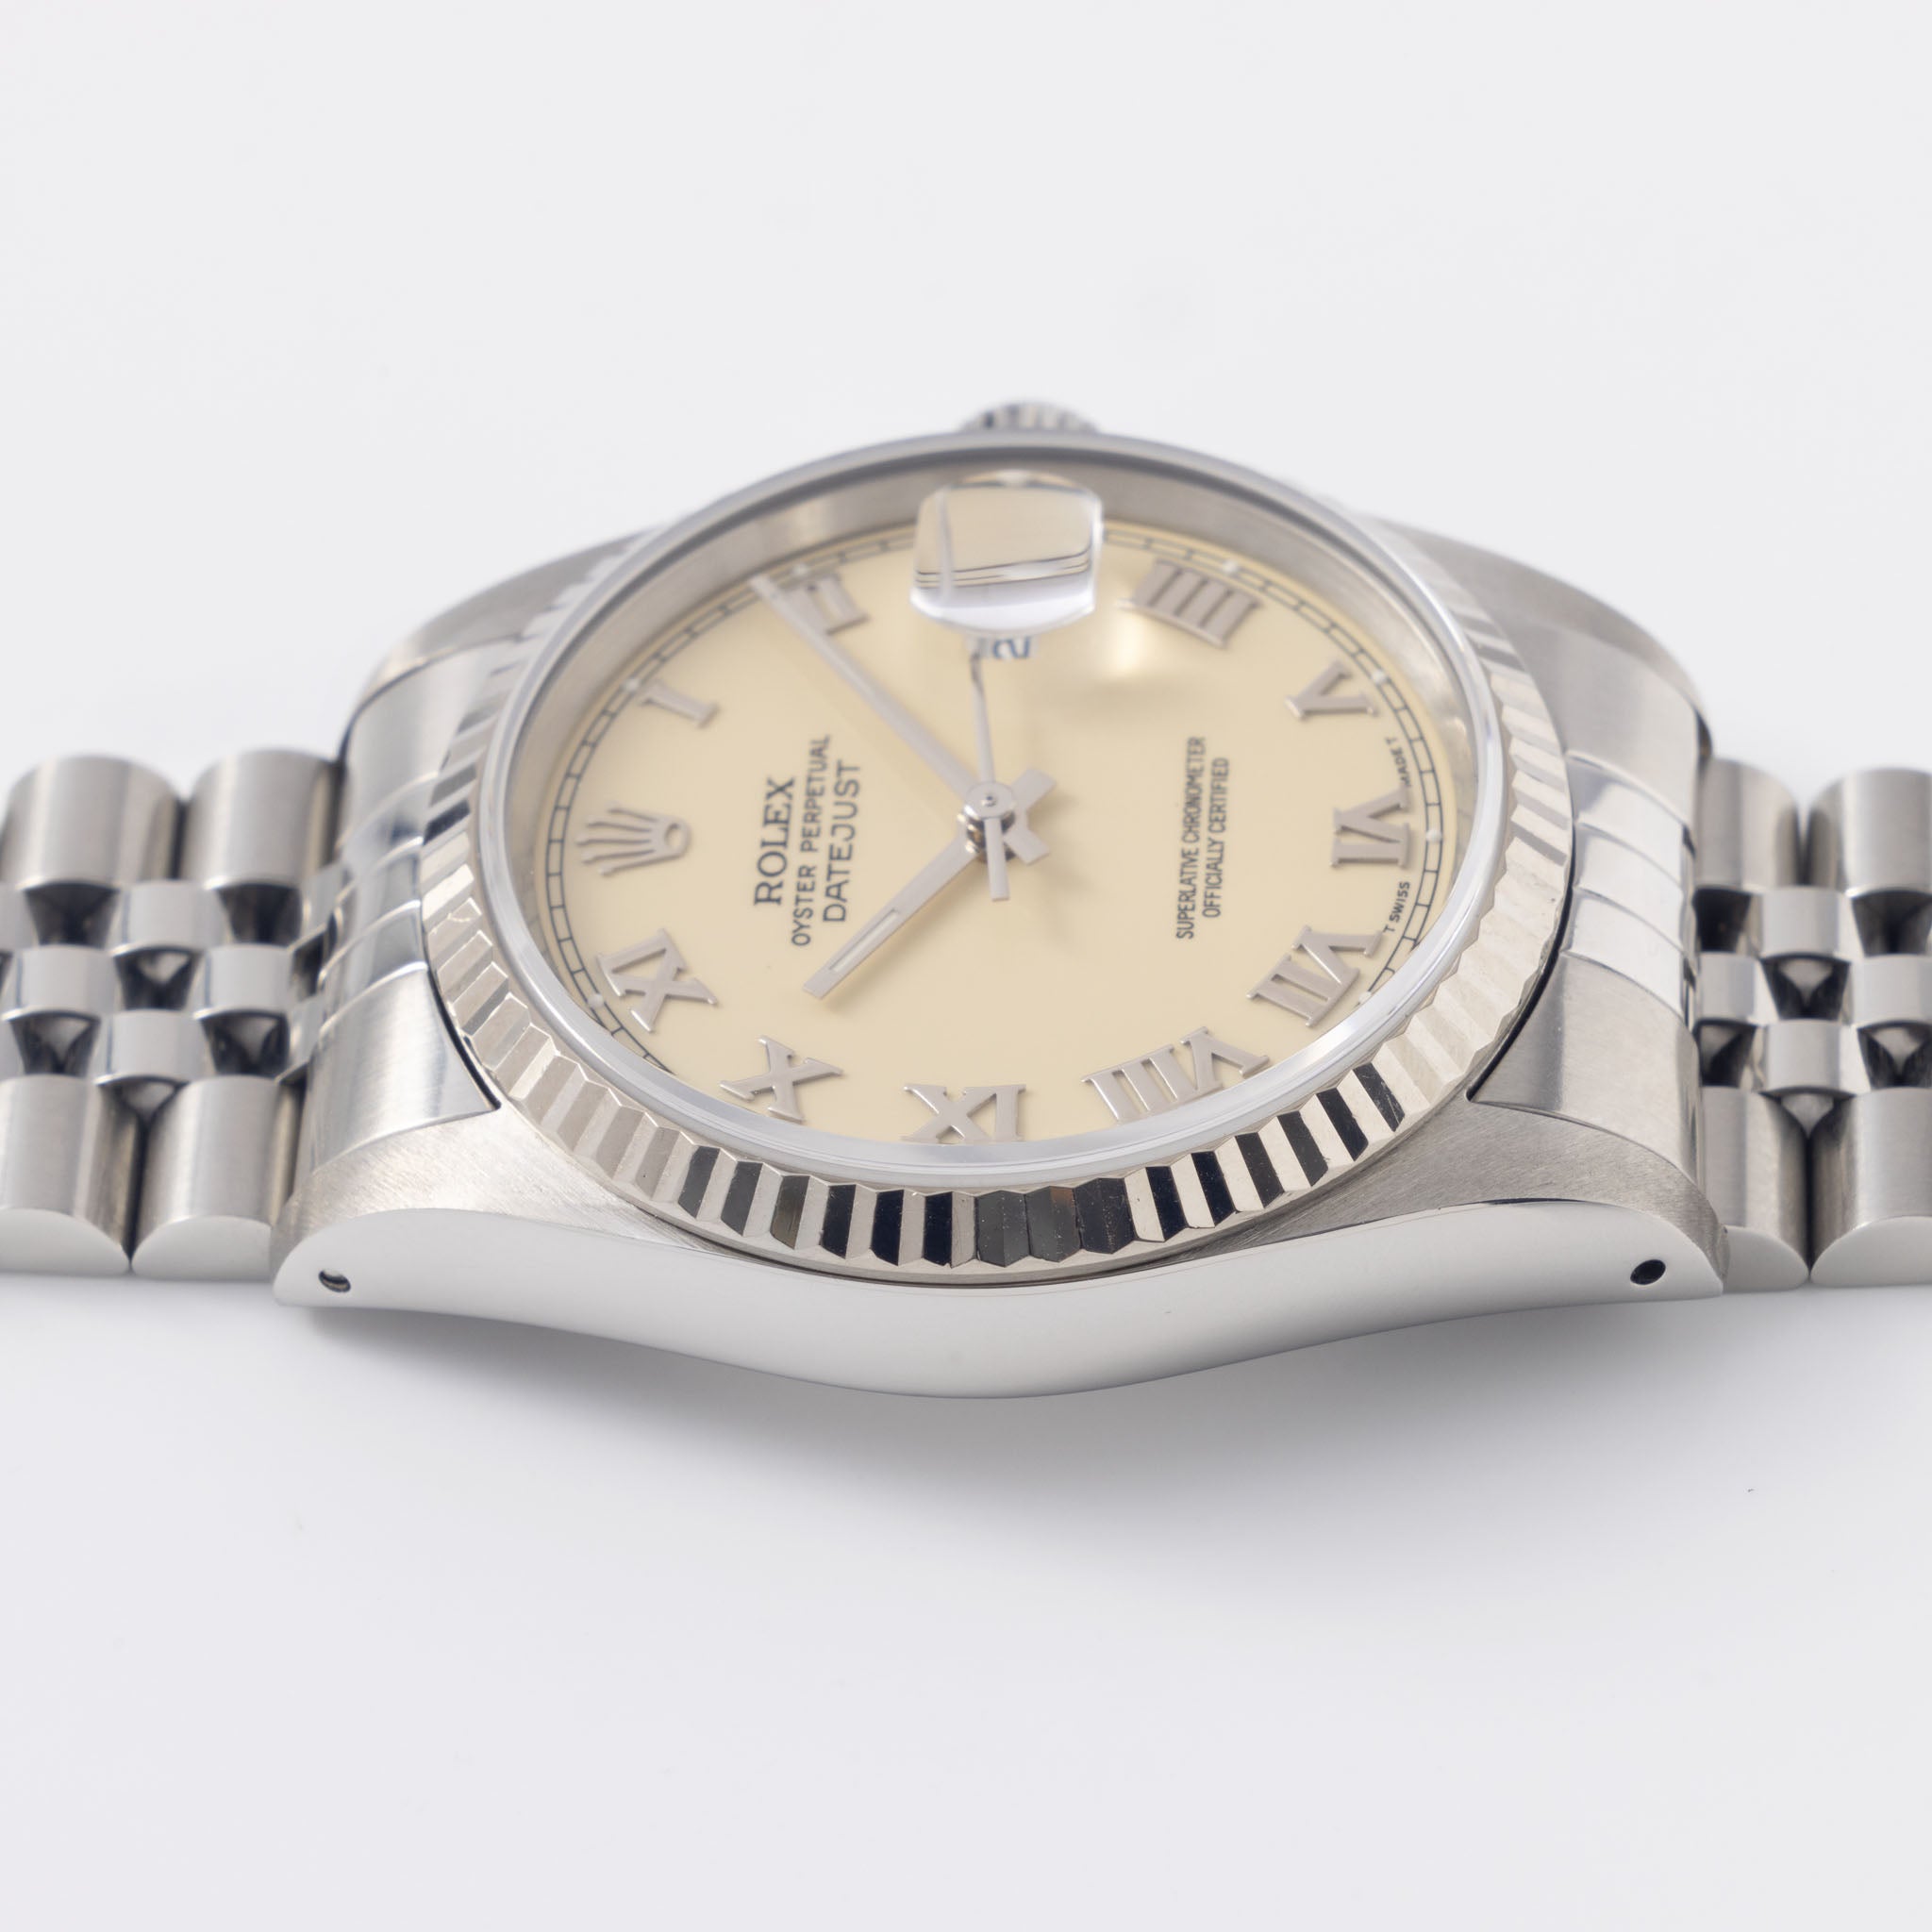 Rolex Datejust Cream Dial with Roman Hours Ref 16234